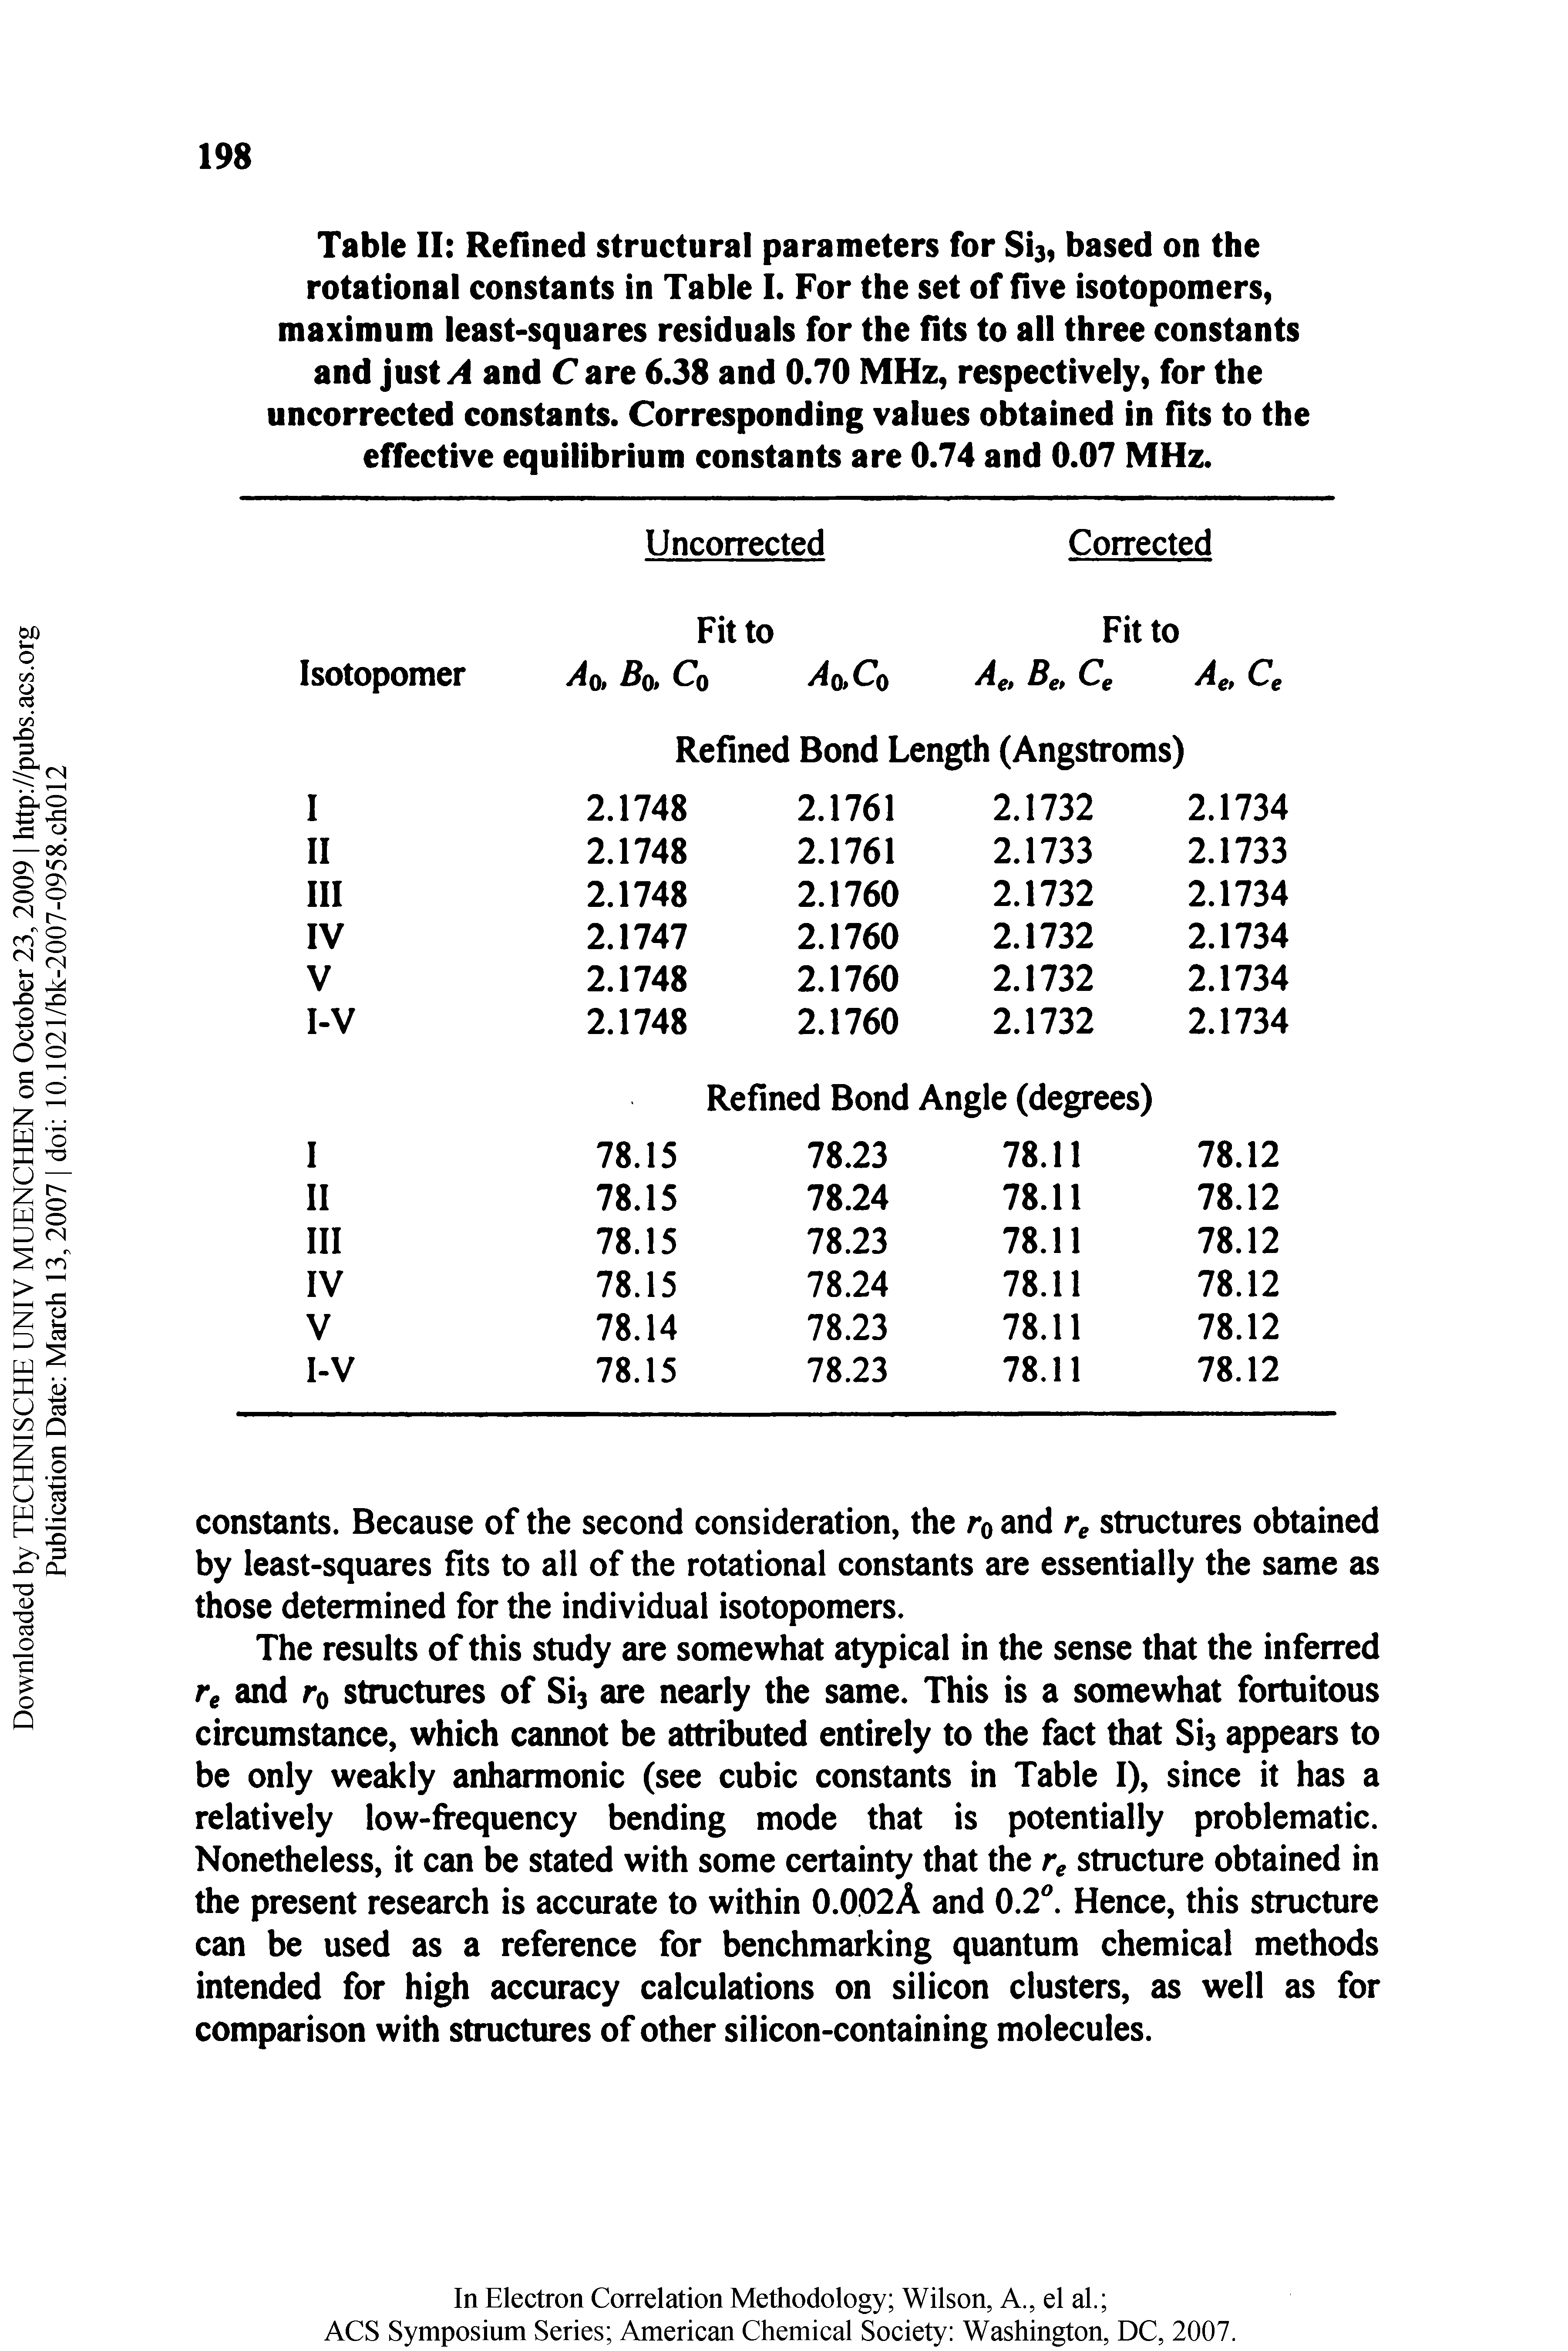 Table II Reflned structural parameters for Sia, based on the rotational constants in Table I. For the set of five isotopomers, maximum least-squares residuals for the fits to all three constants...